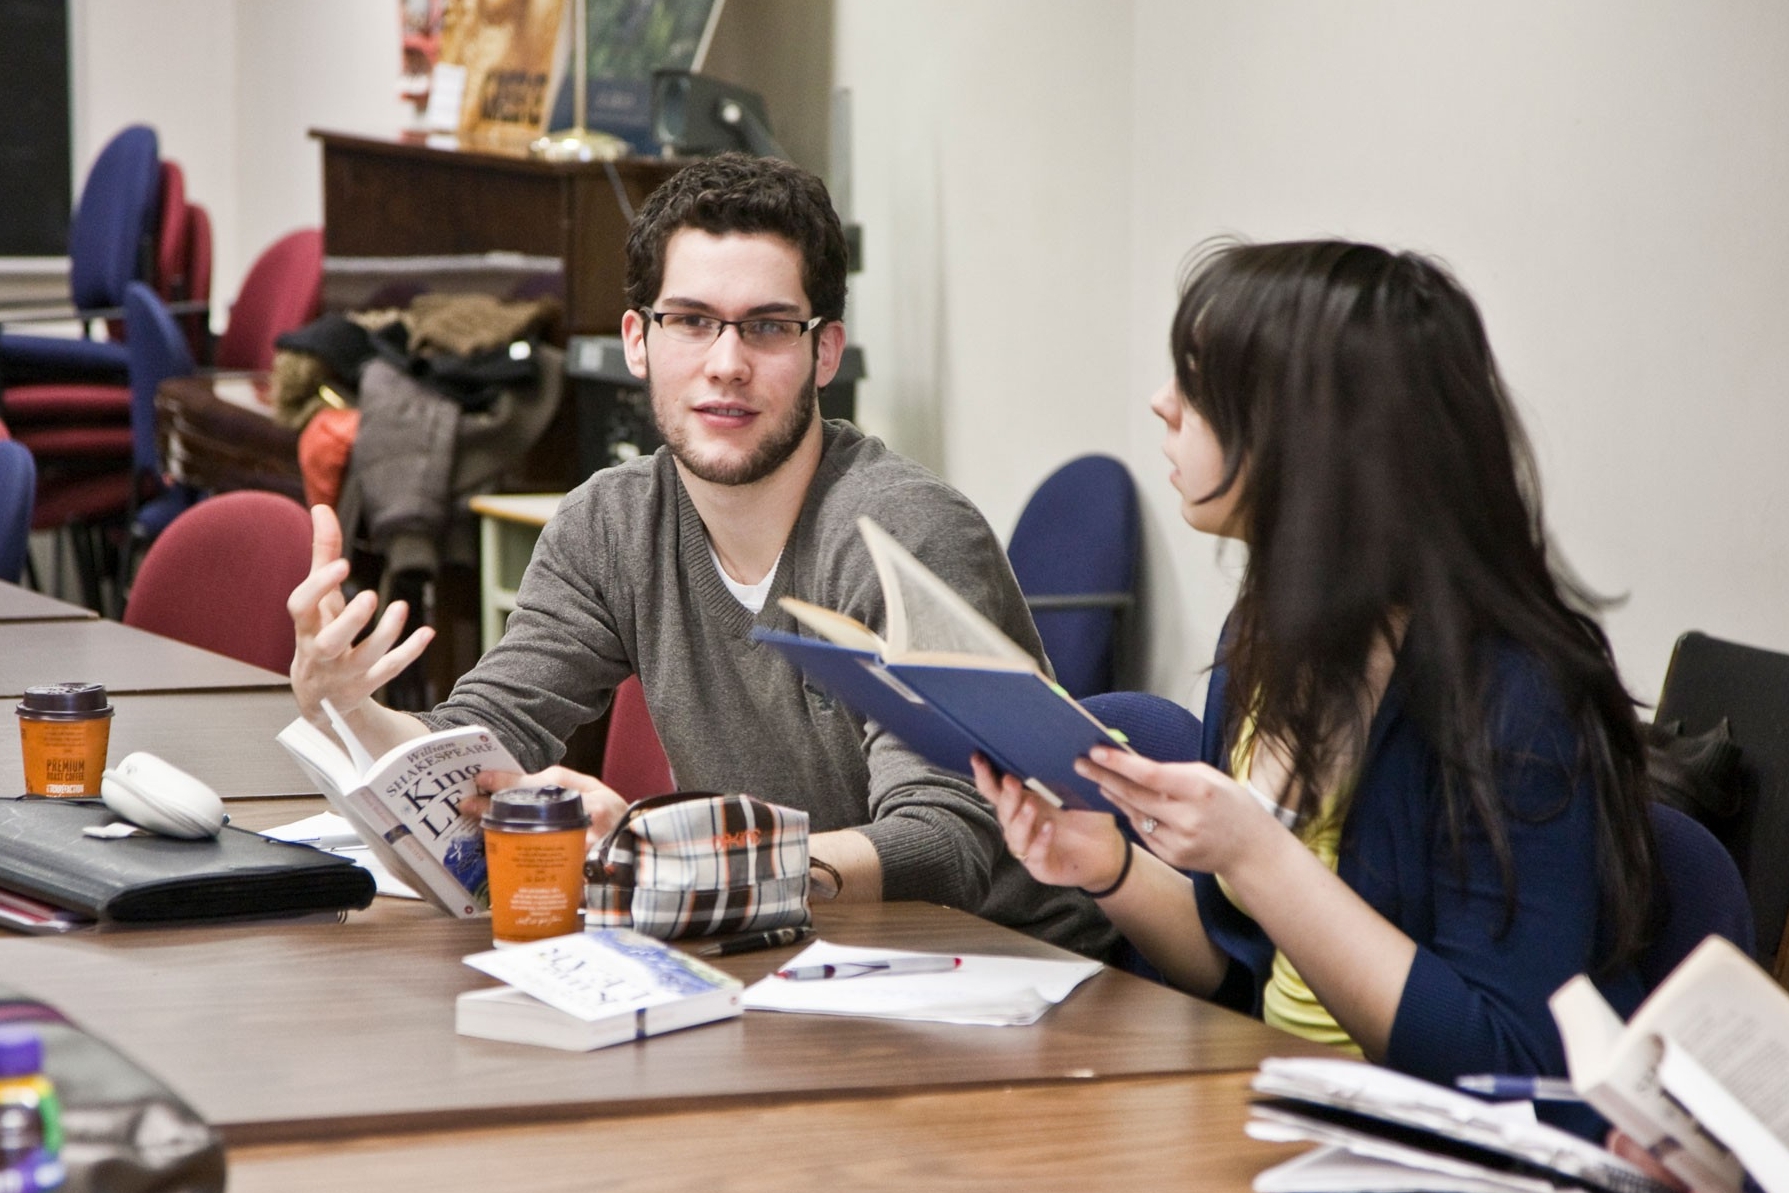 Two Liberal Arts College students hold books and discuss the readings in class.